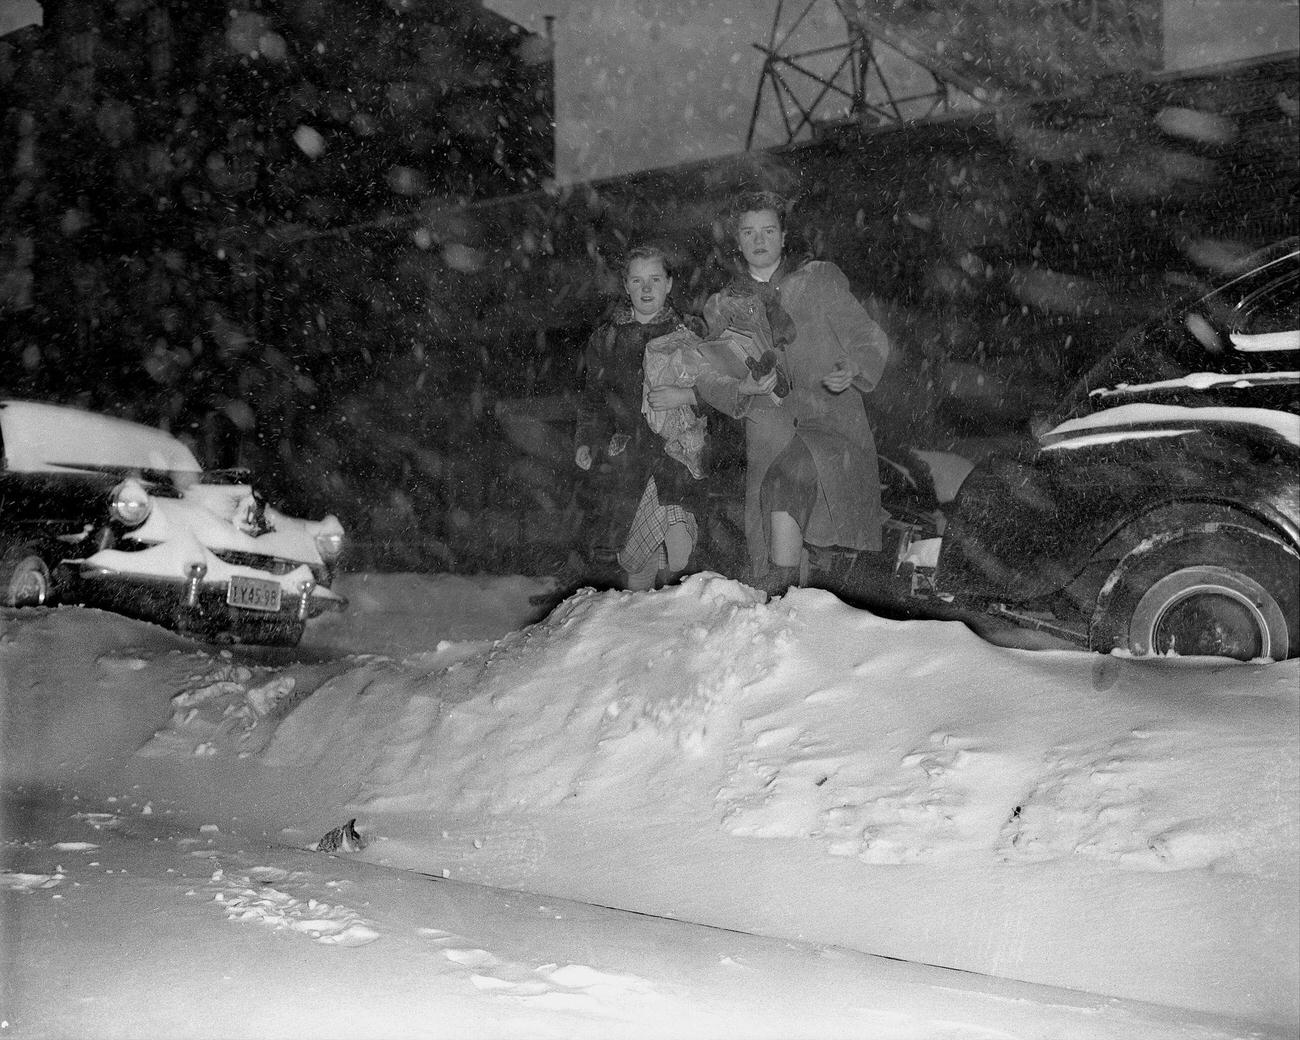 The Donovan Sisters, Elizabeth And Mary, Of 197 Flatbush Avenue., Brooklyn, Plunge Through Some Of That Borough'S Piled Drifts Of Dec. 26, 1947 Snow, Topped By Yesterday'S Fall.